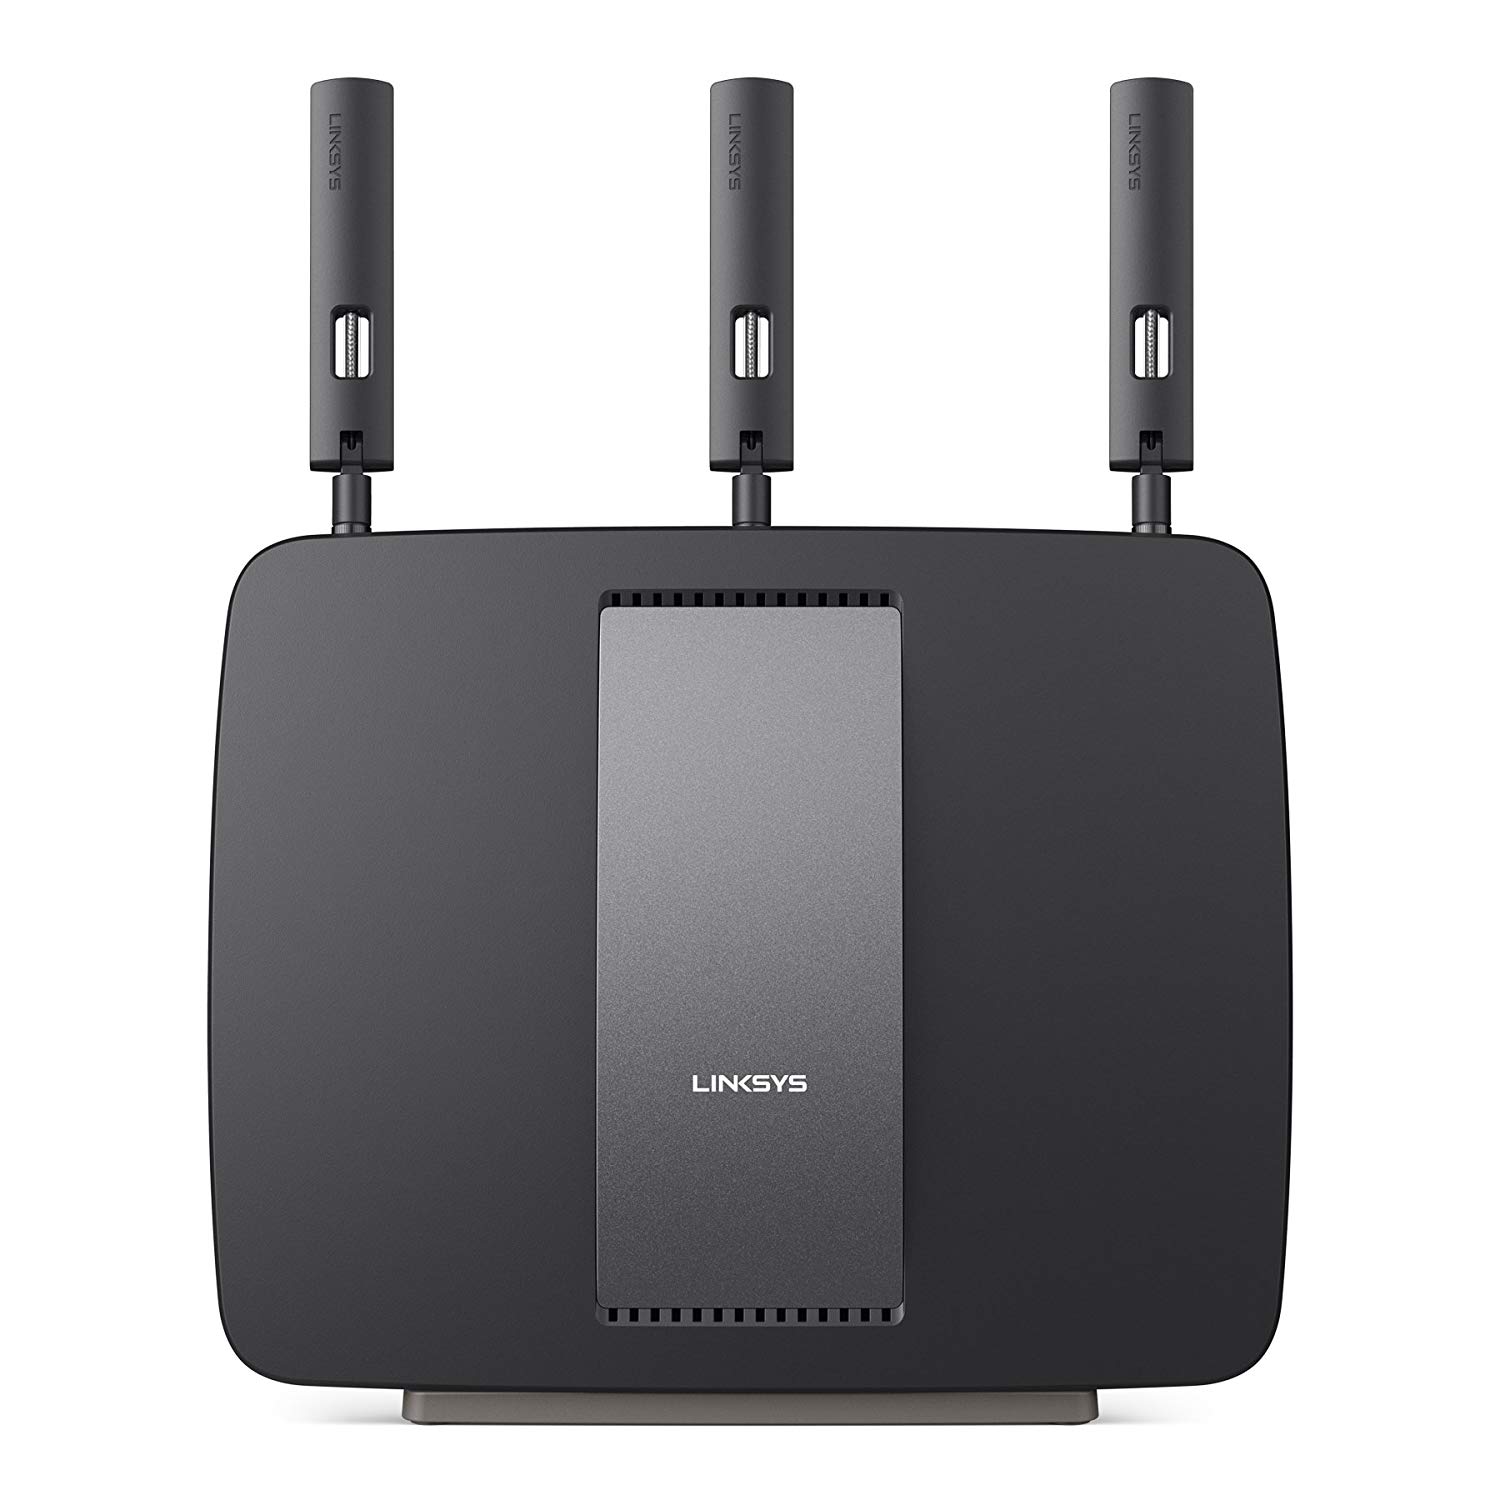 Linksys AC3200 Tri-Band Smart Wi-Fi Router with Gigabit and USB, Designed for Device-Heavy Homes, Smart Wi-Fi App Enabled to Control Your Network from Anywhere